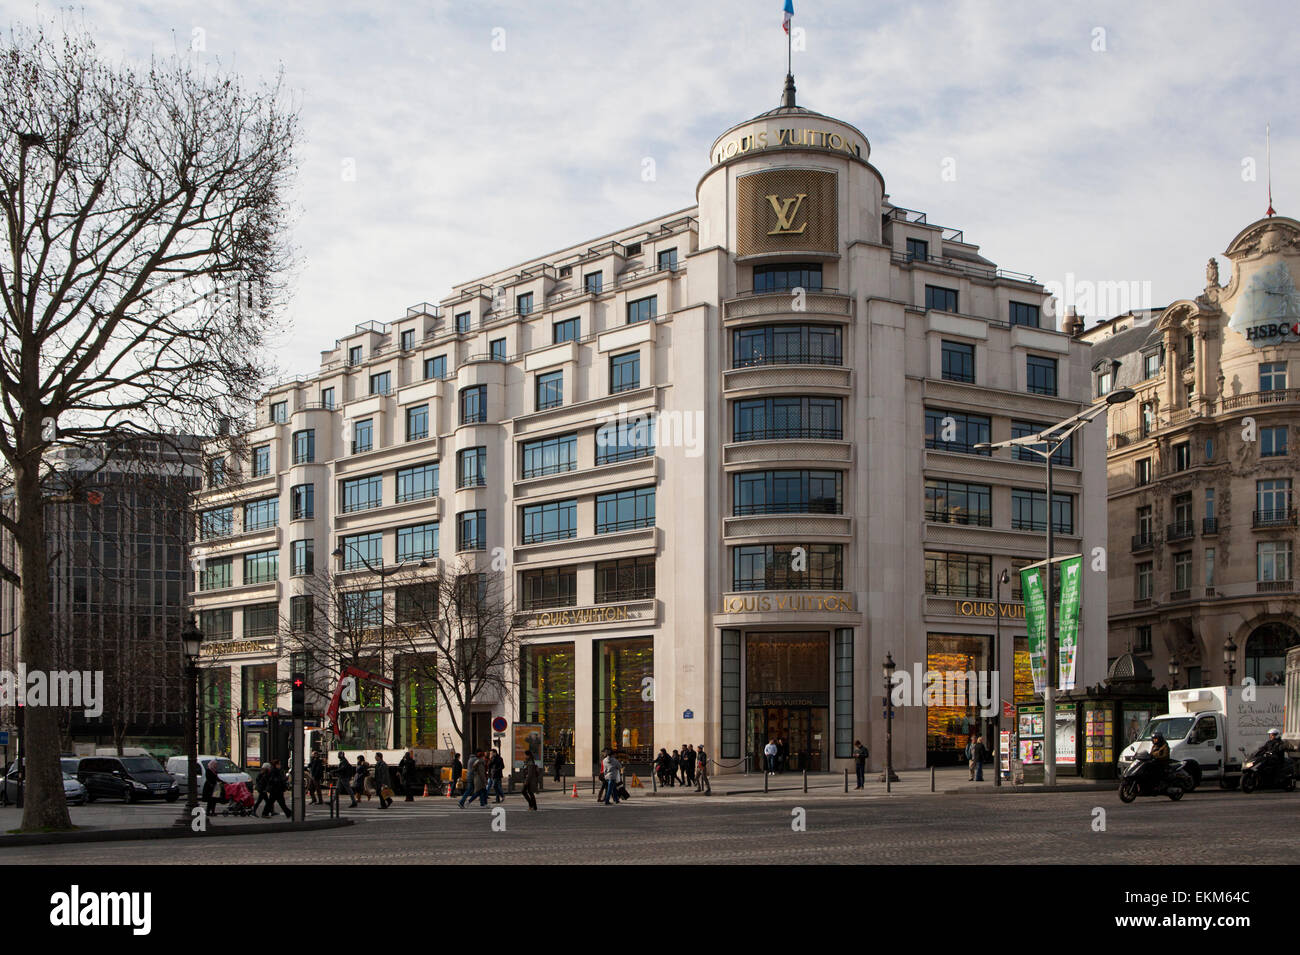 The Louis Vuitton retail store on the Champs Elysees in Paris Stock Photo: 80963804 - Alamy